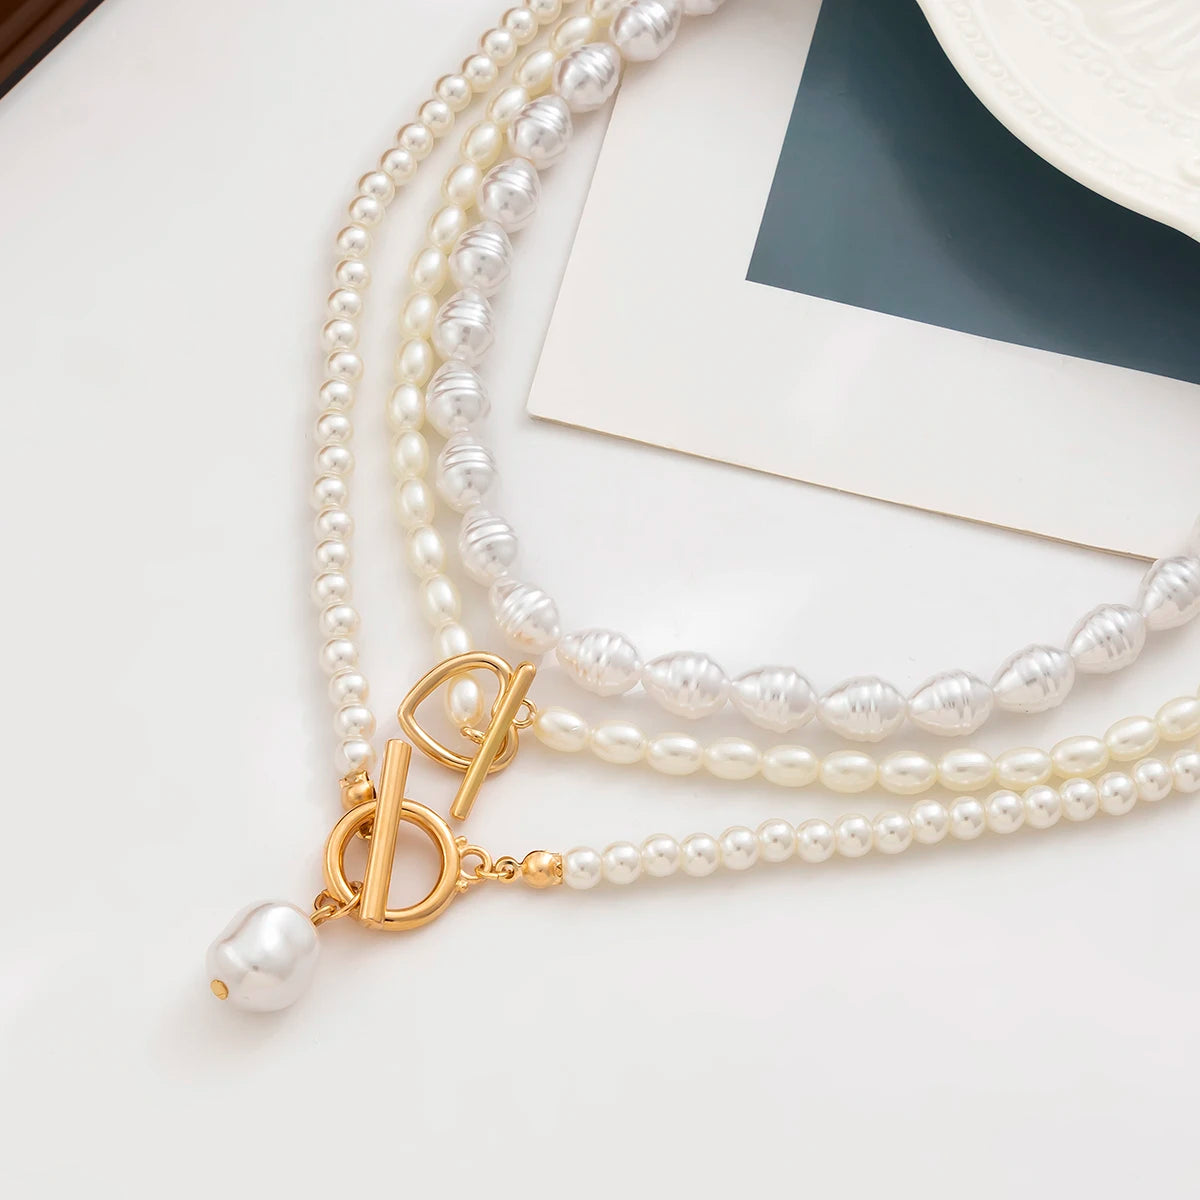 Vintage Imitation-Pearl Heart OT Buckle Pendant Necklace Women Wedding Bridal Bead Chain Neck Accessories Jewelry New